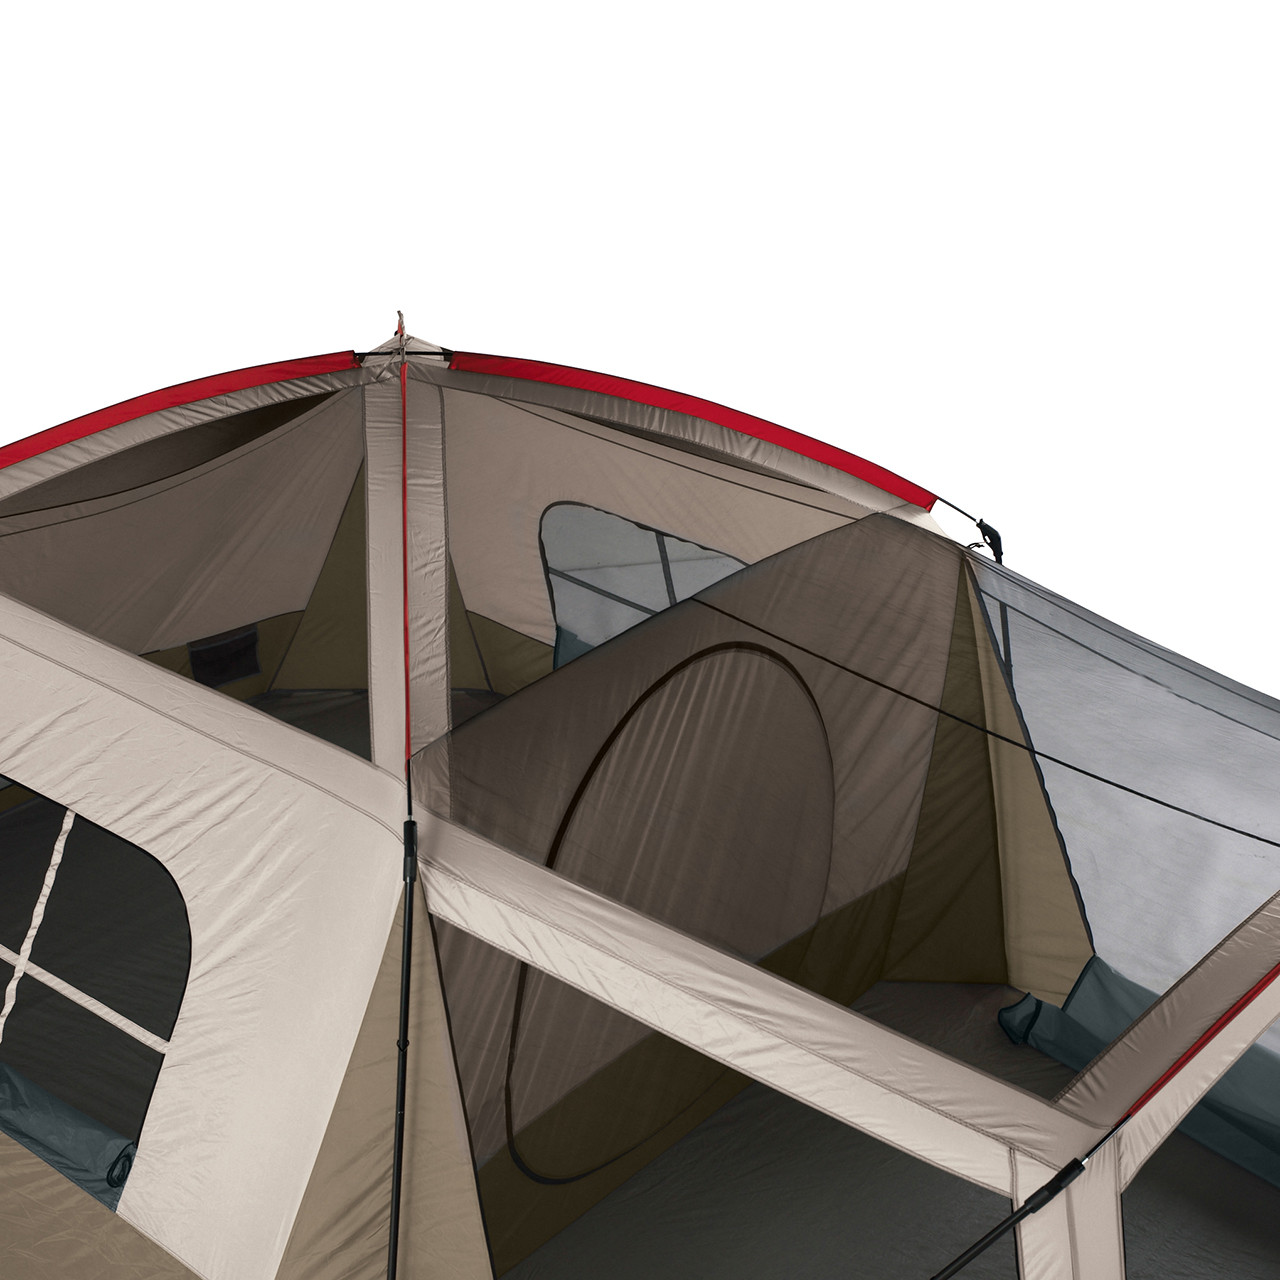 Top view of the Wenzel Klondike 8 tent setup without the rain fly on showing the mesh ceiling and interior of the tent